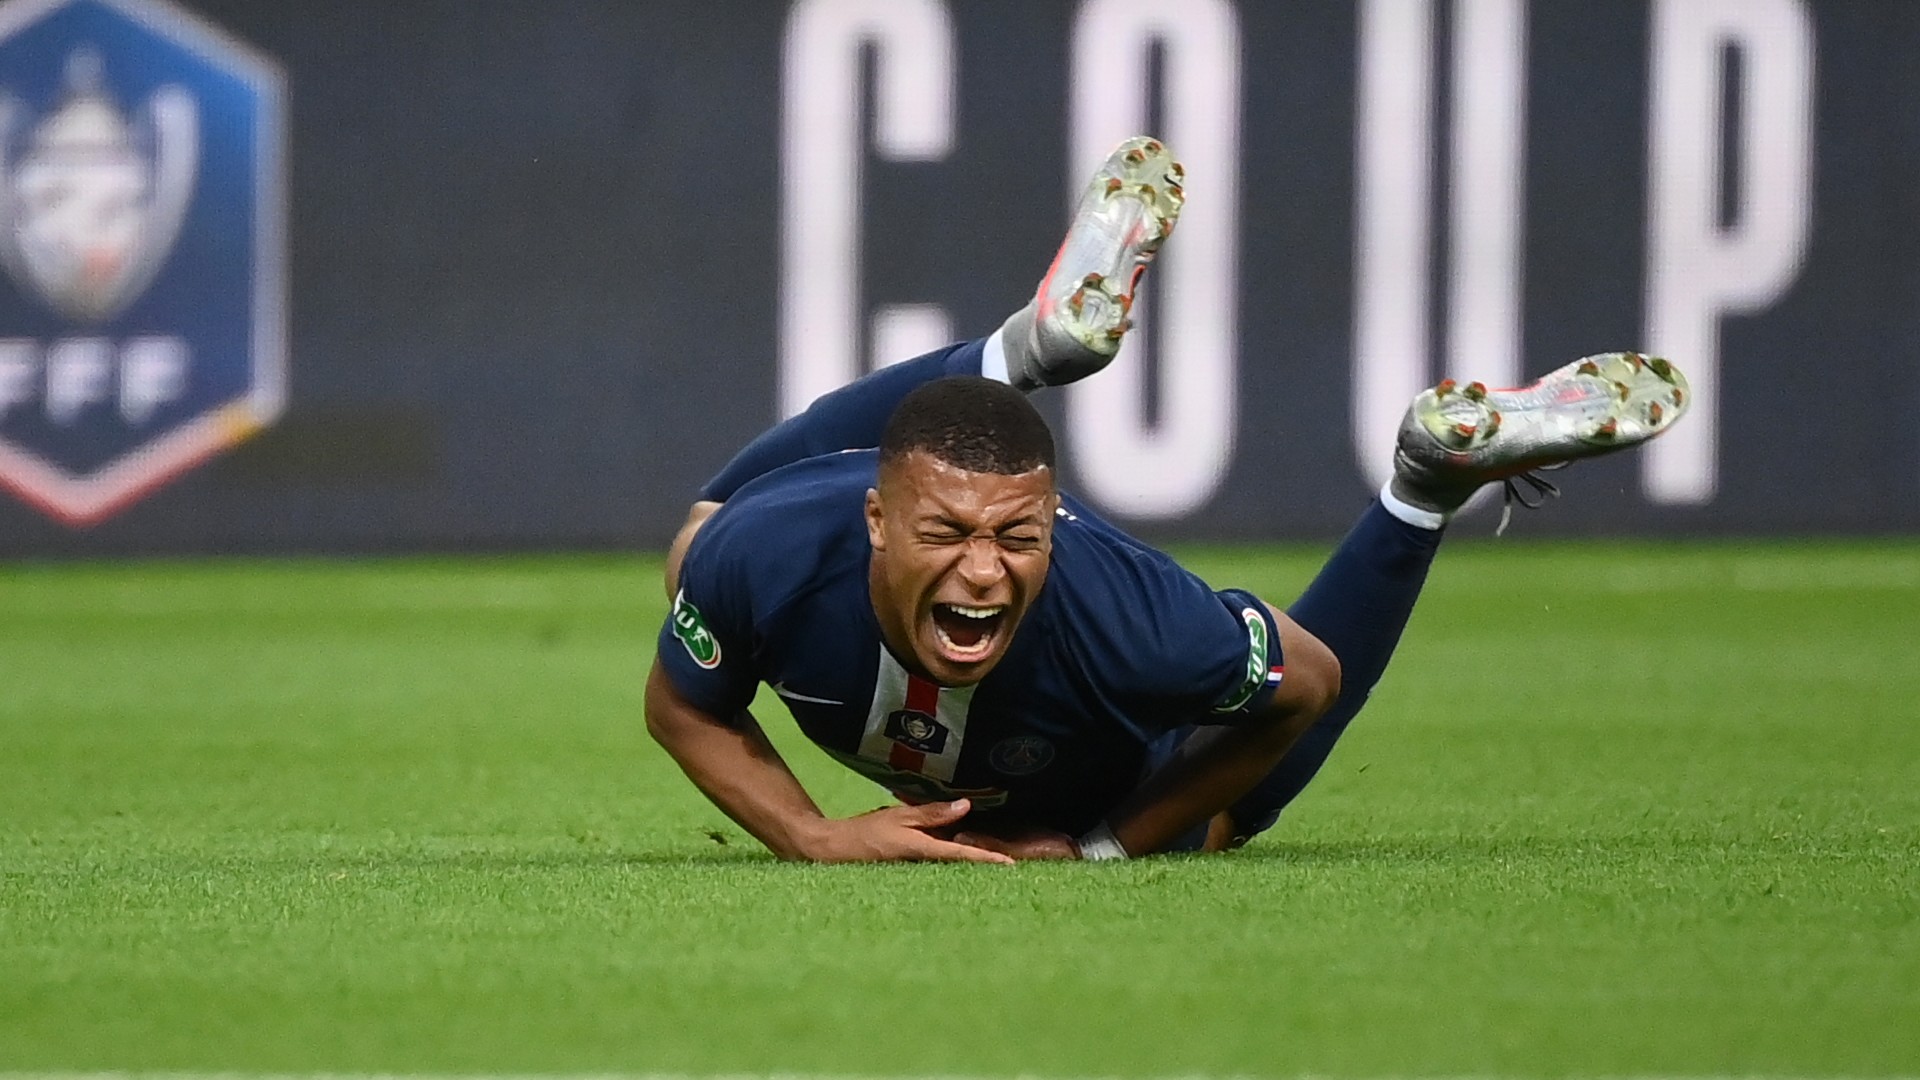 Mbappe expected to miss PSG's Champions League clash with Atalanta due to ankle injury